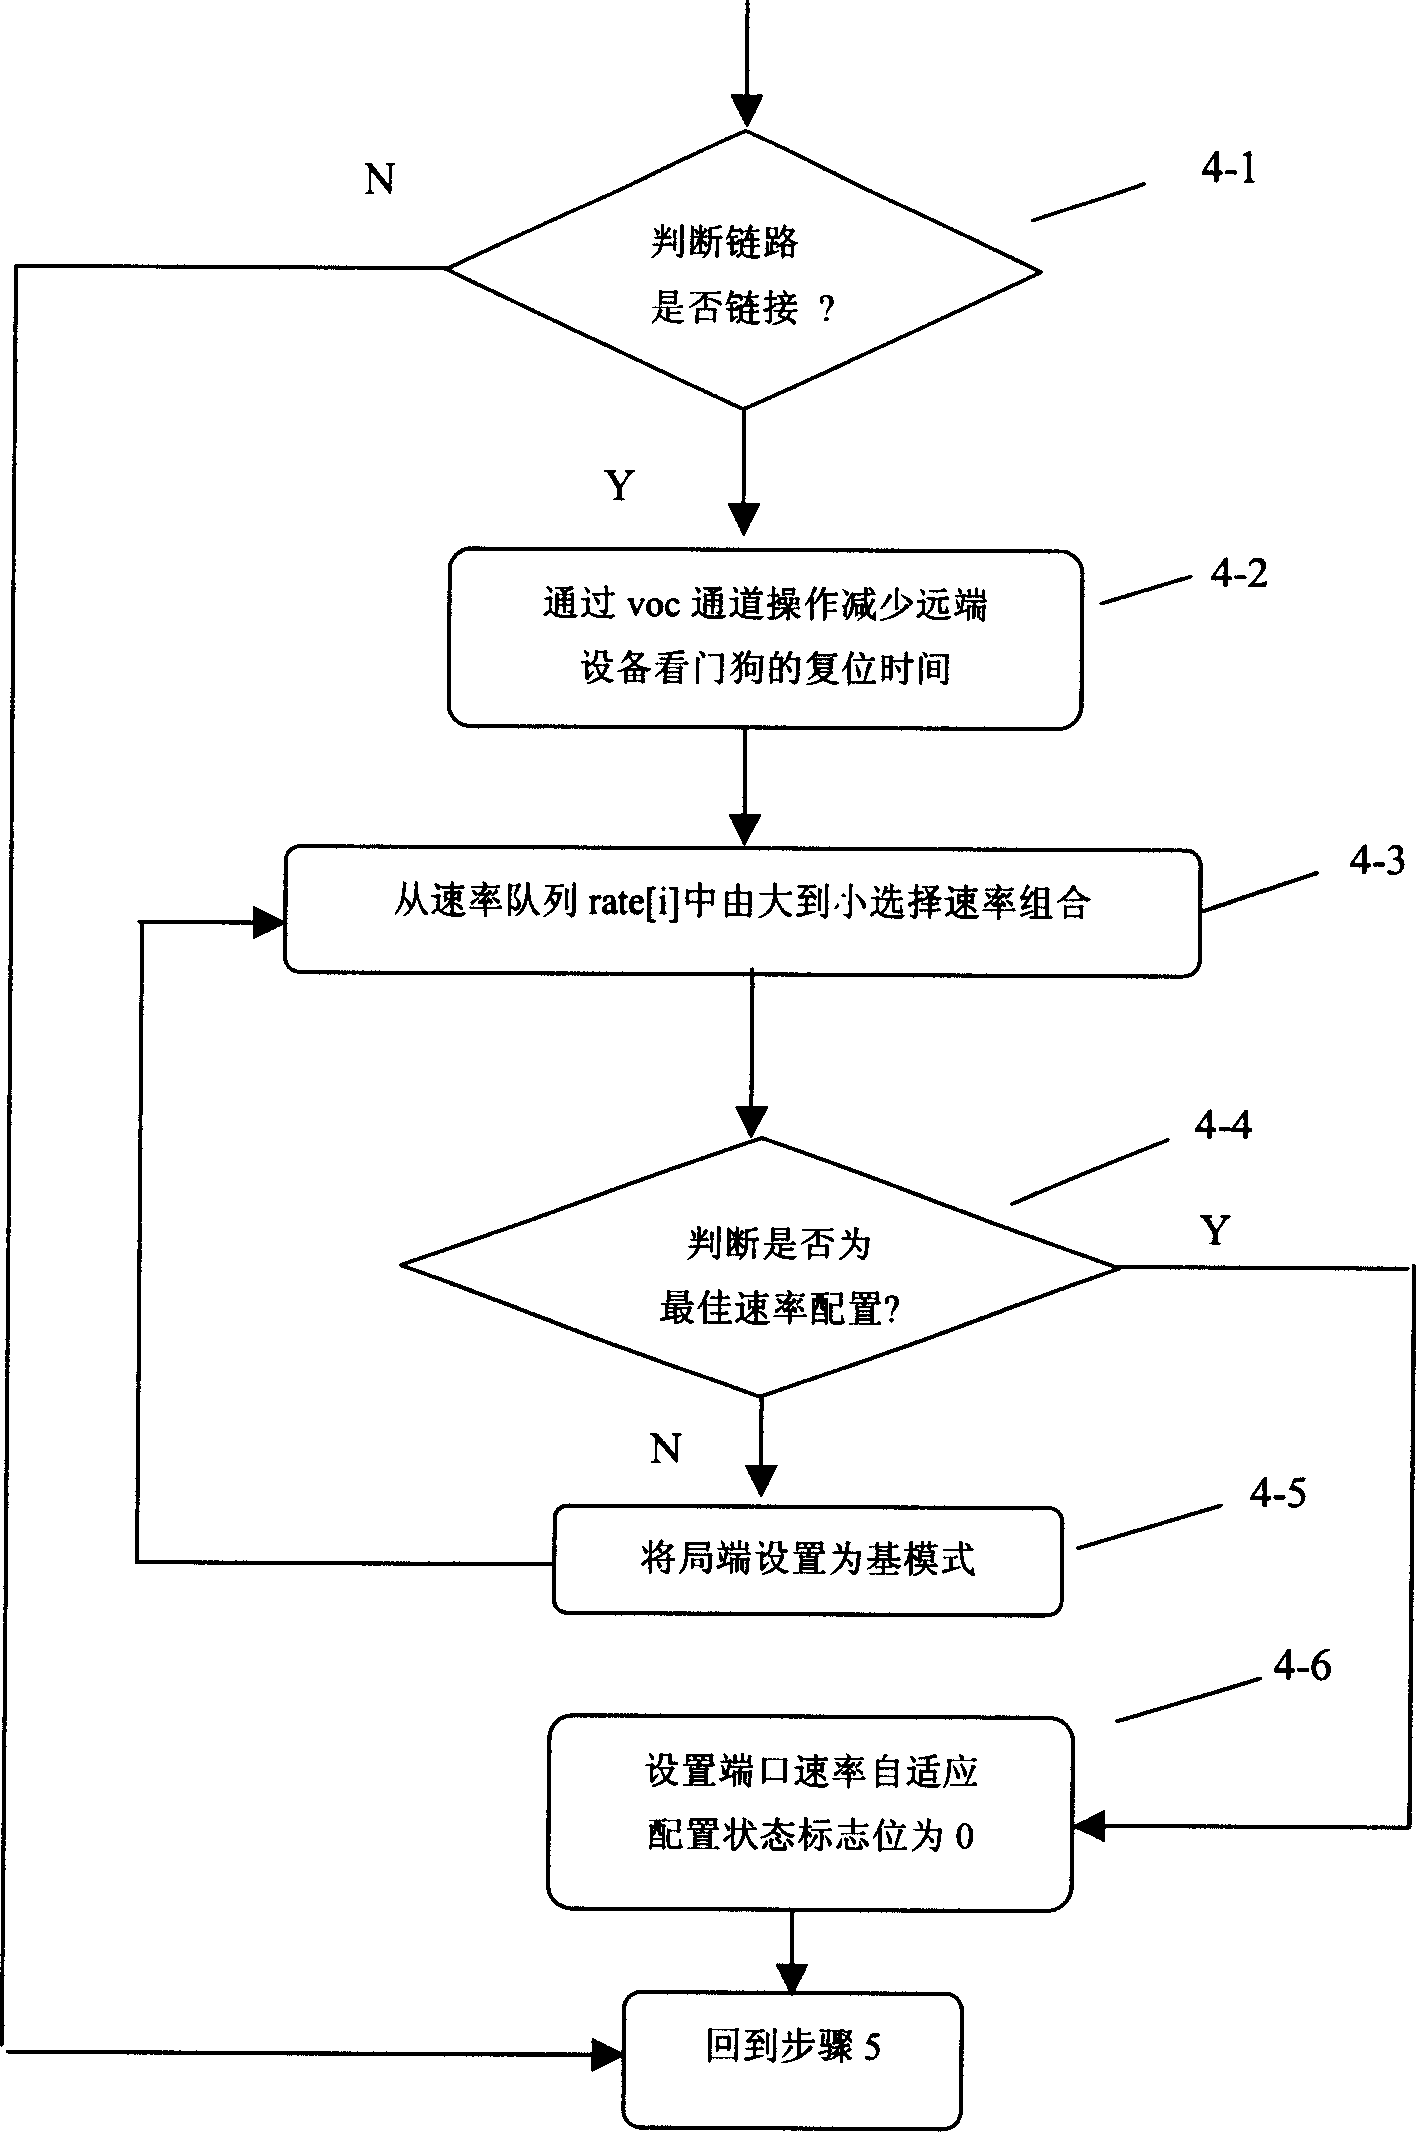 Method of self-adaptive configuration for ultrahigh bit rate data client line rate